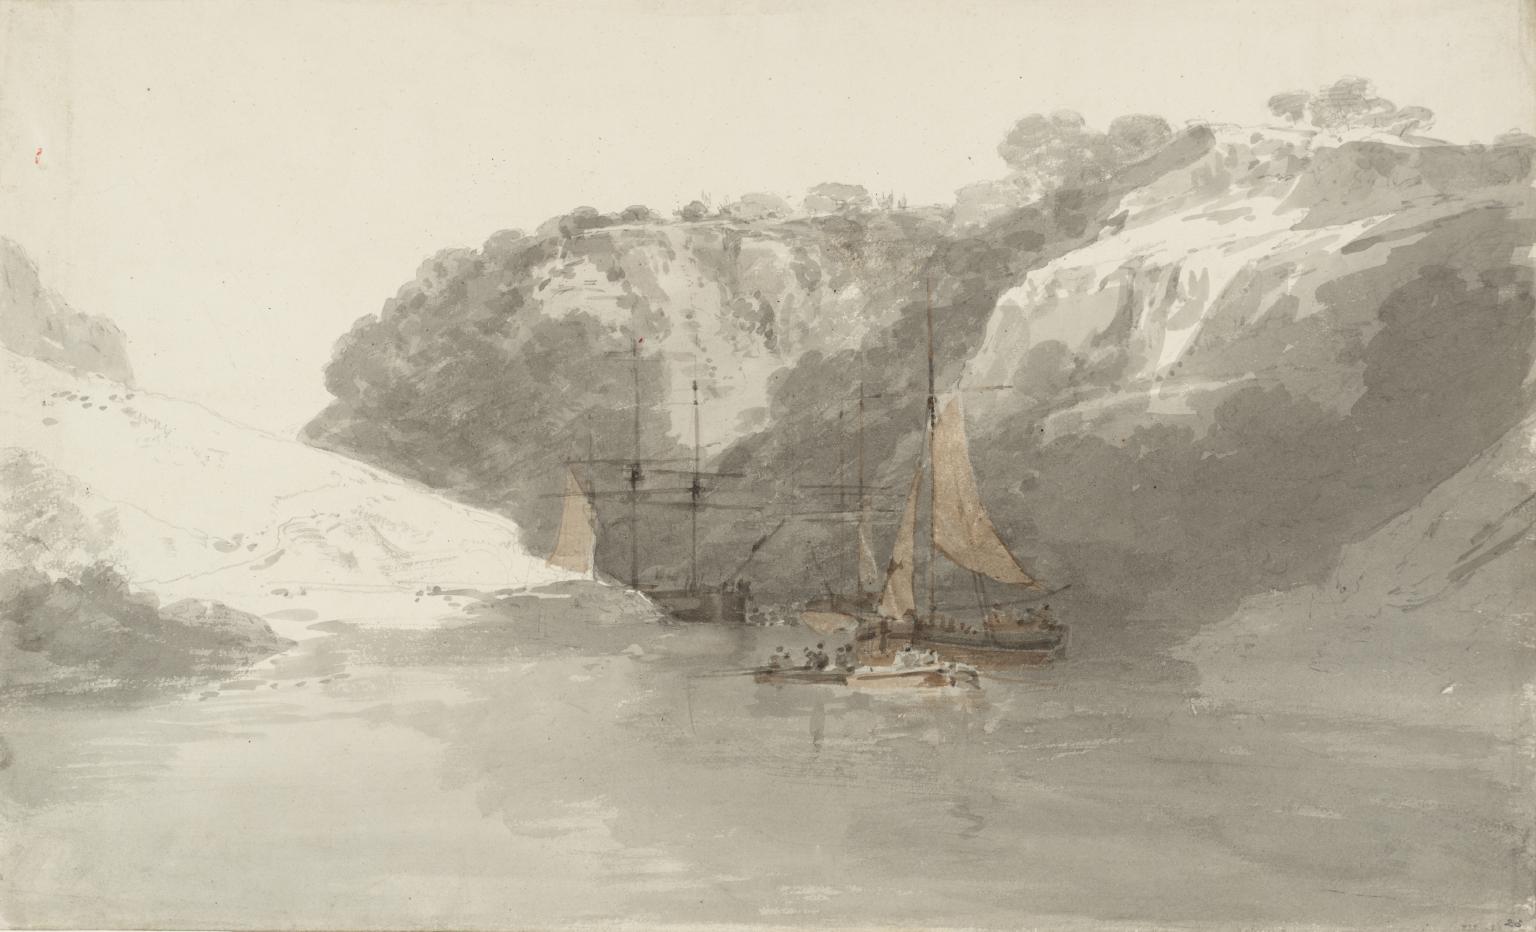 i>from</i> Swans Sketchbook [Finberg XLII], Bristol: Shipping in the  Harbour, Joseph Mallord William Turner, 1798